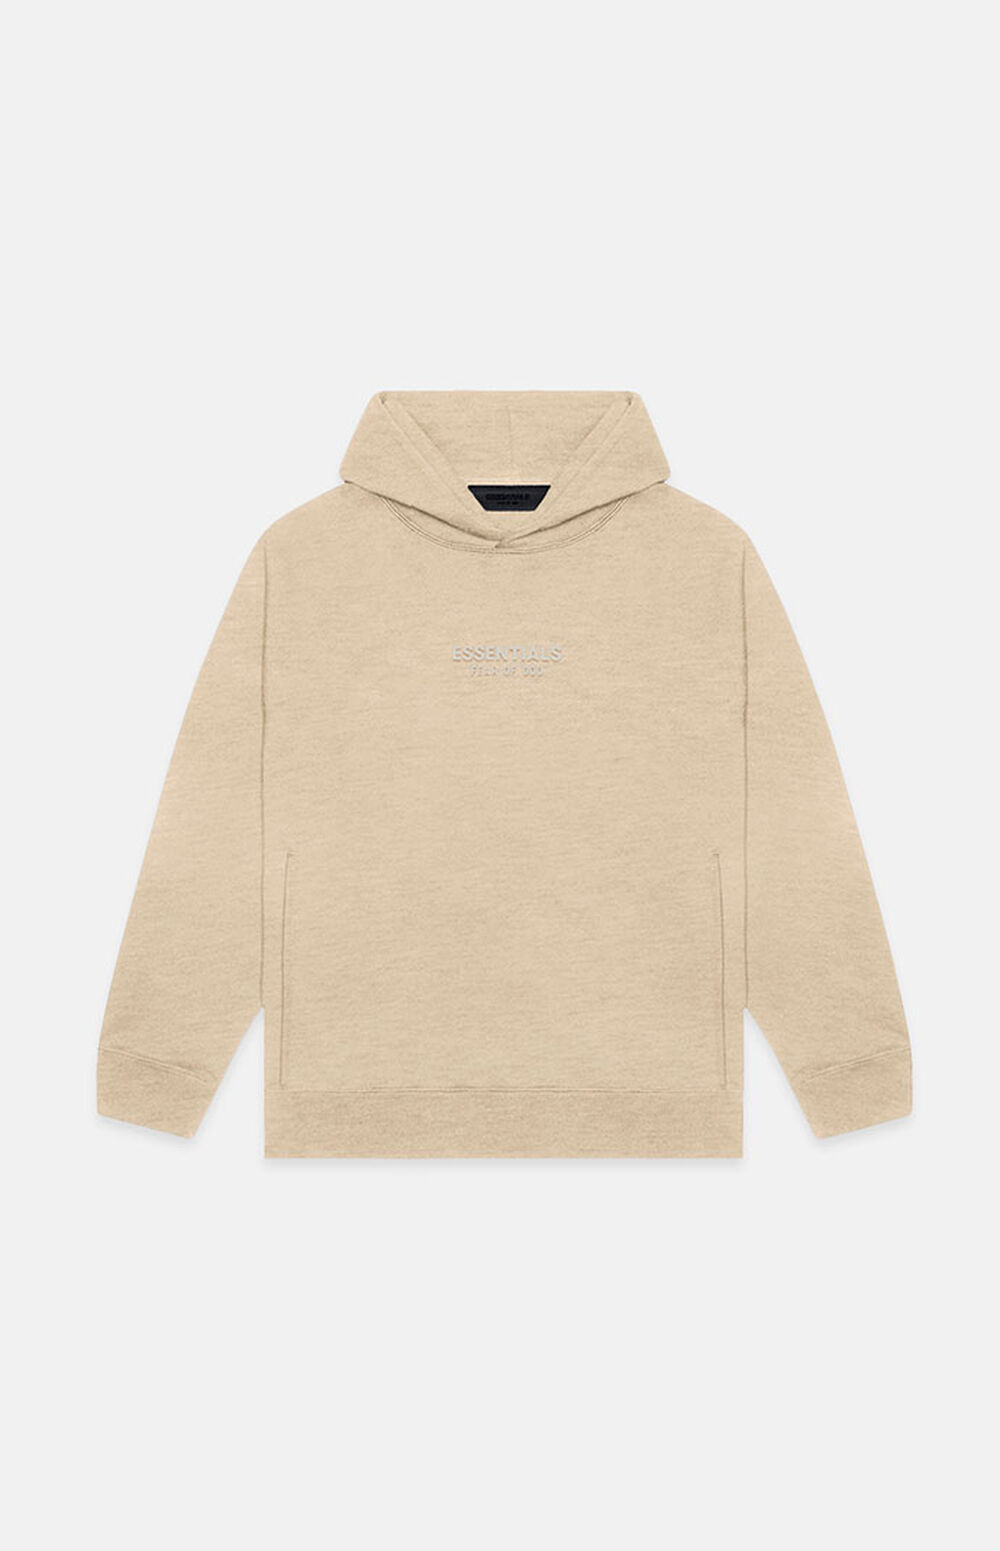 Fear of God Essentials Gold Heather Hoodie | PacSun